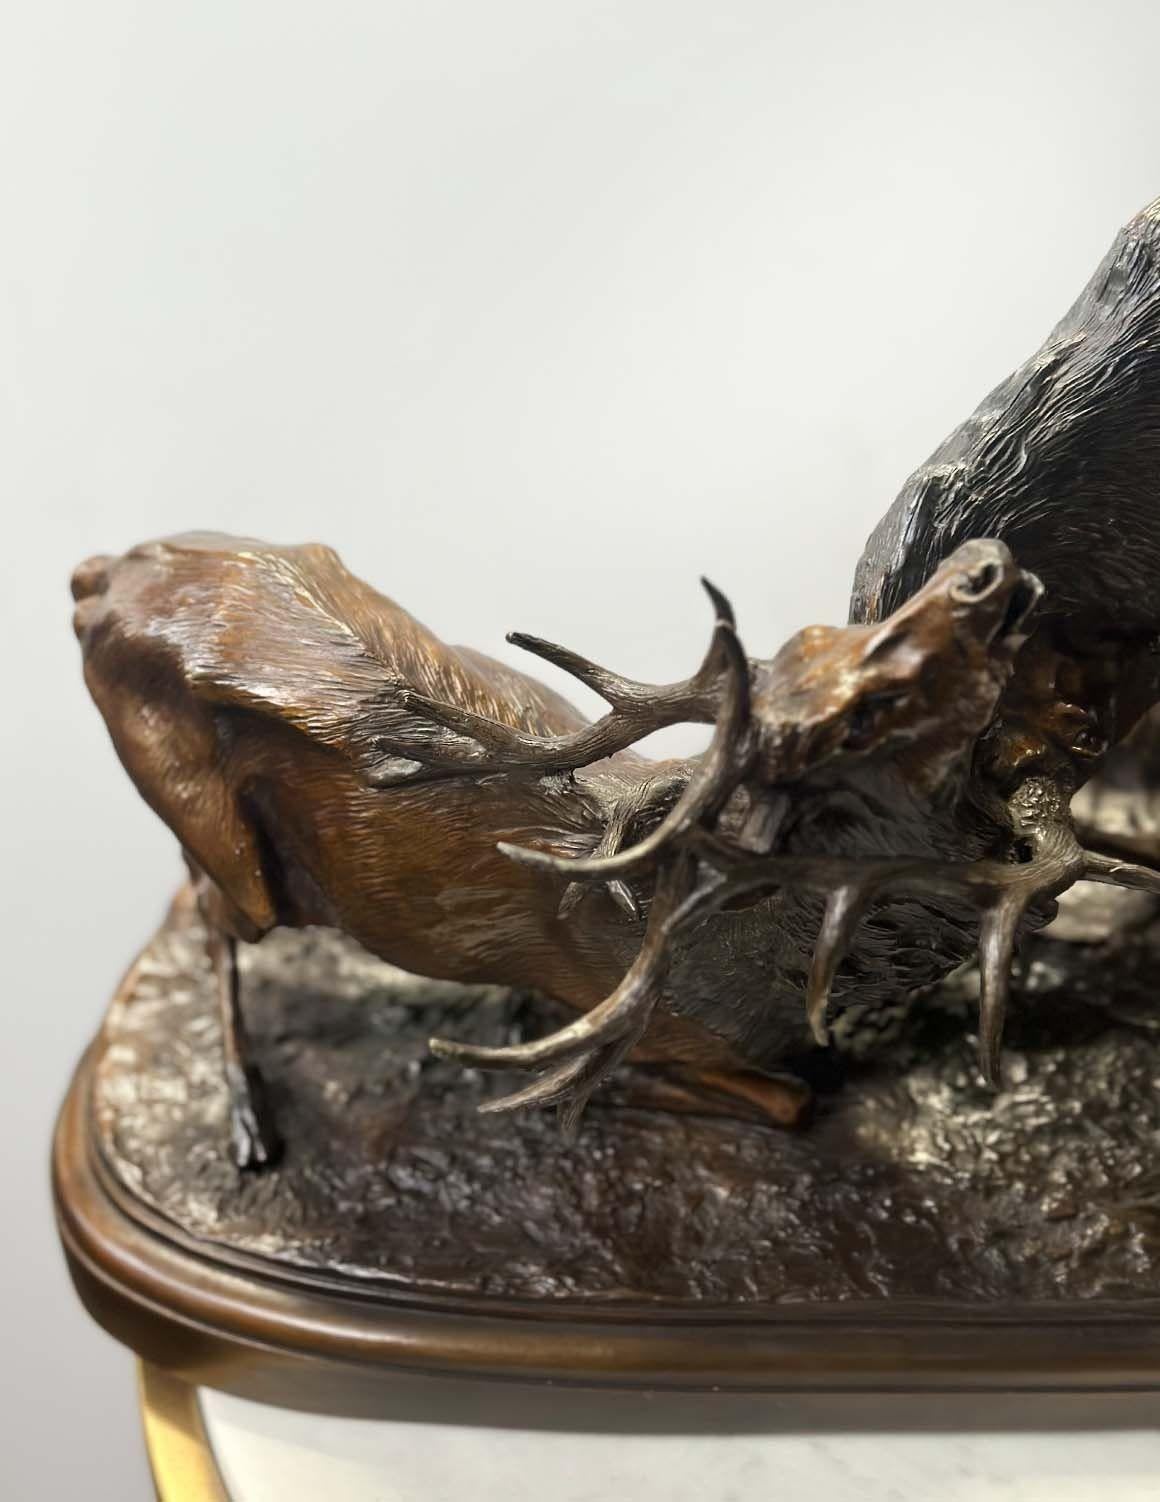 The Late 19th Century bronze sculpture by Pierre-Jules Mêne (French, 1810-1879) captures a riveting moment in the natural world, portraying two majestic elks engaged in a fierce and dynamic battle.
The bronze is marked with the artist's distinctive